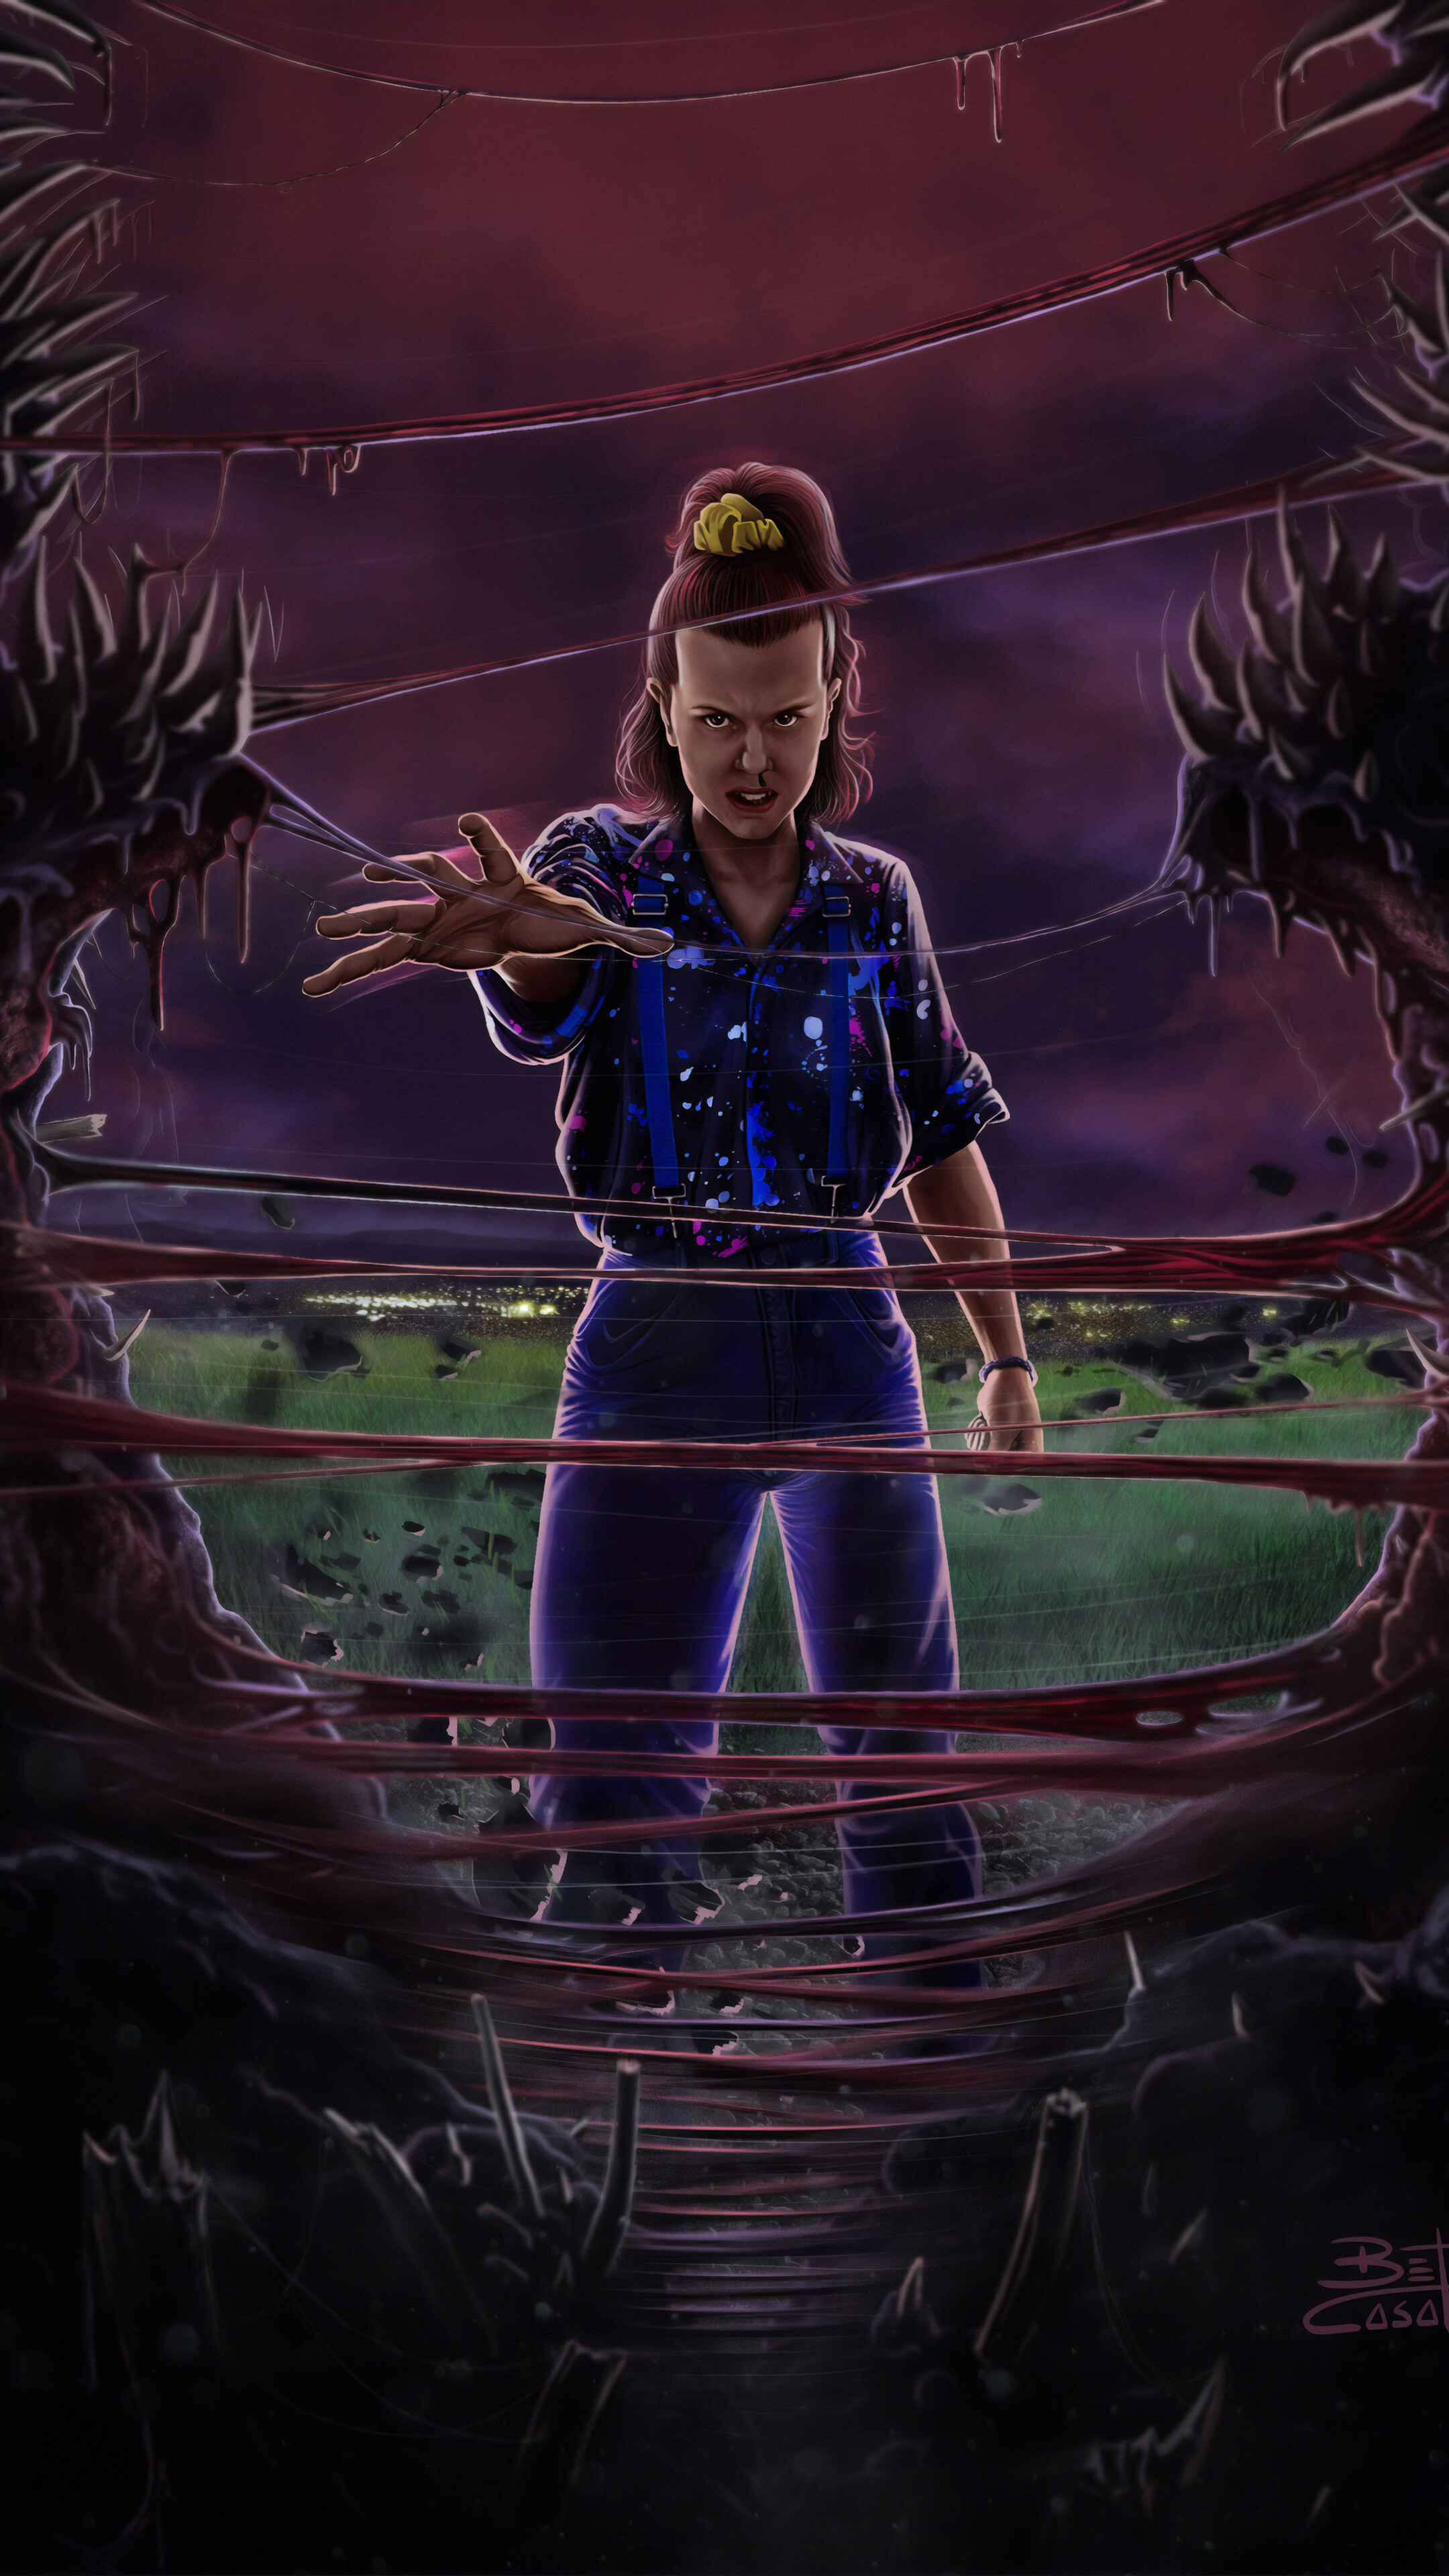 Stranger Things: Eleven, one of the protagonists of the Netflix science fiction horror drama series. 2160x3840 4K Background.